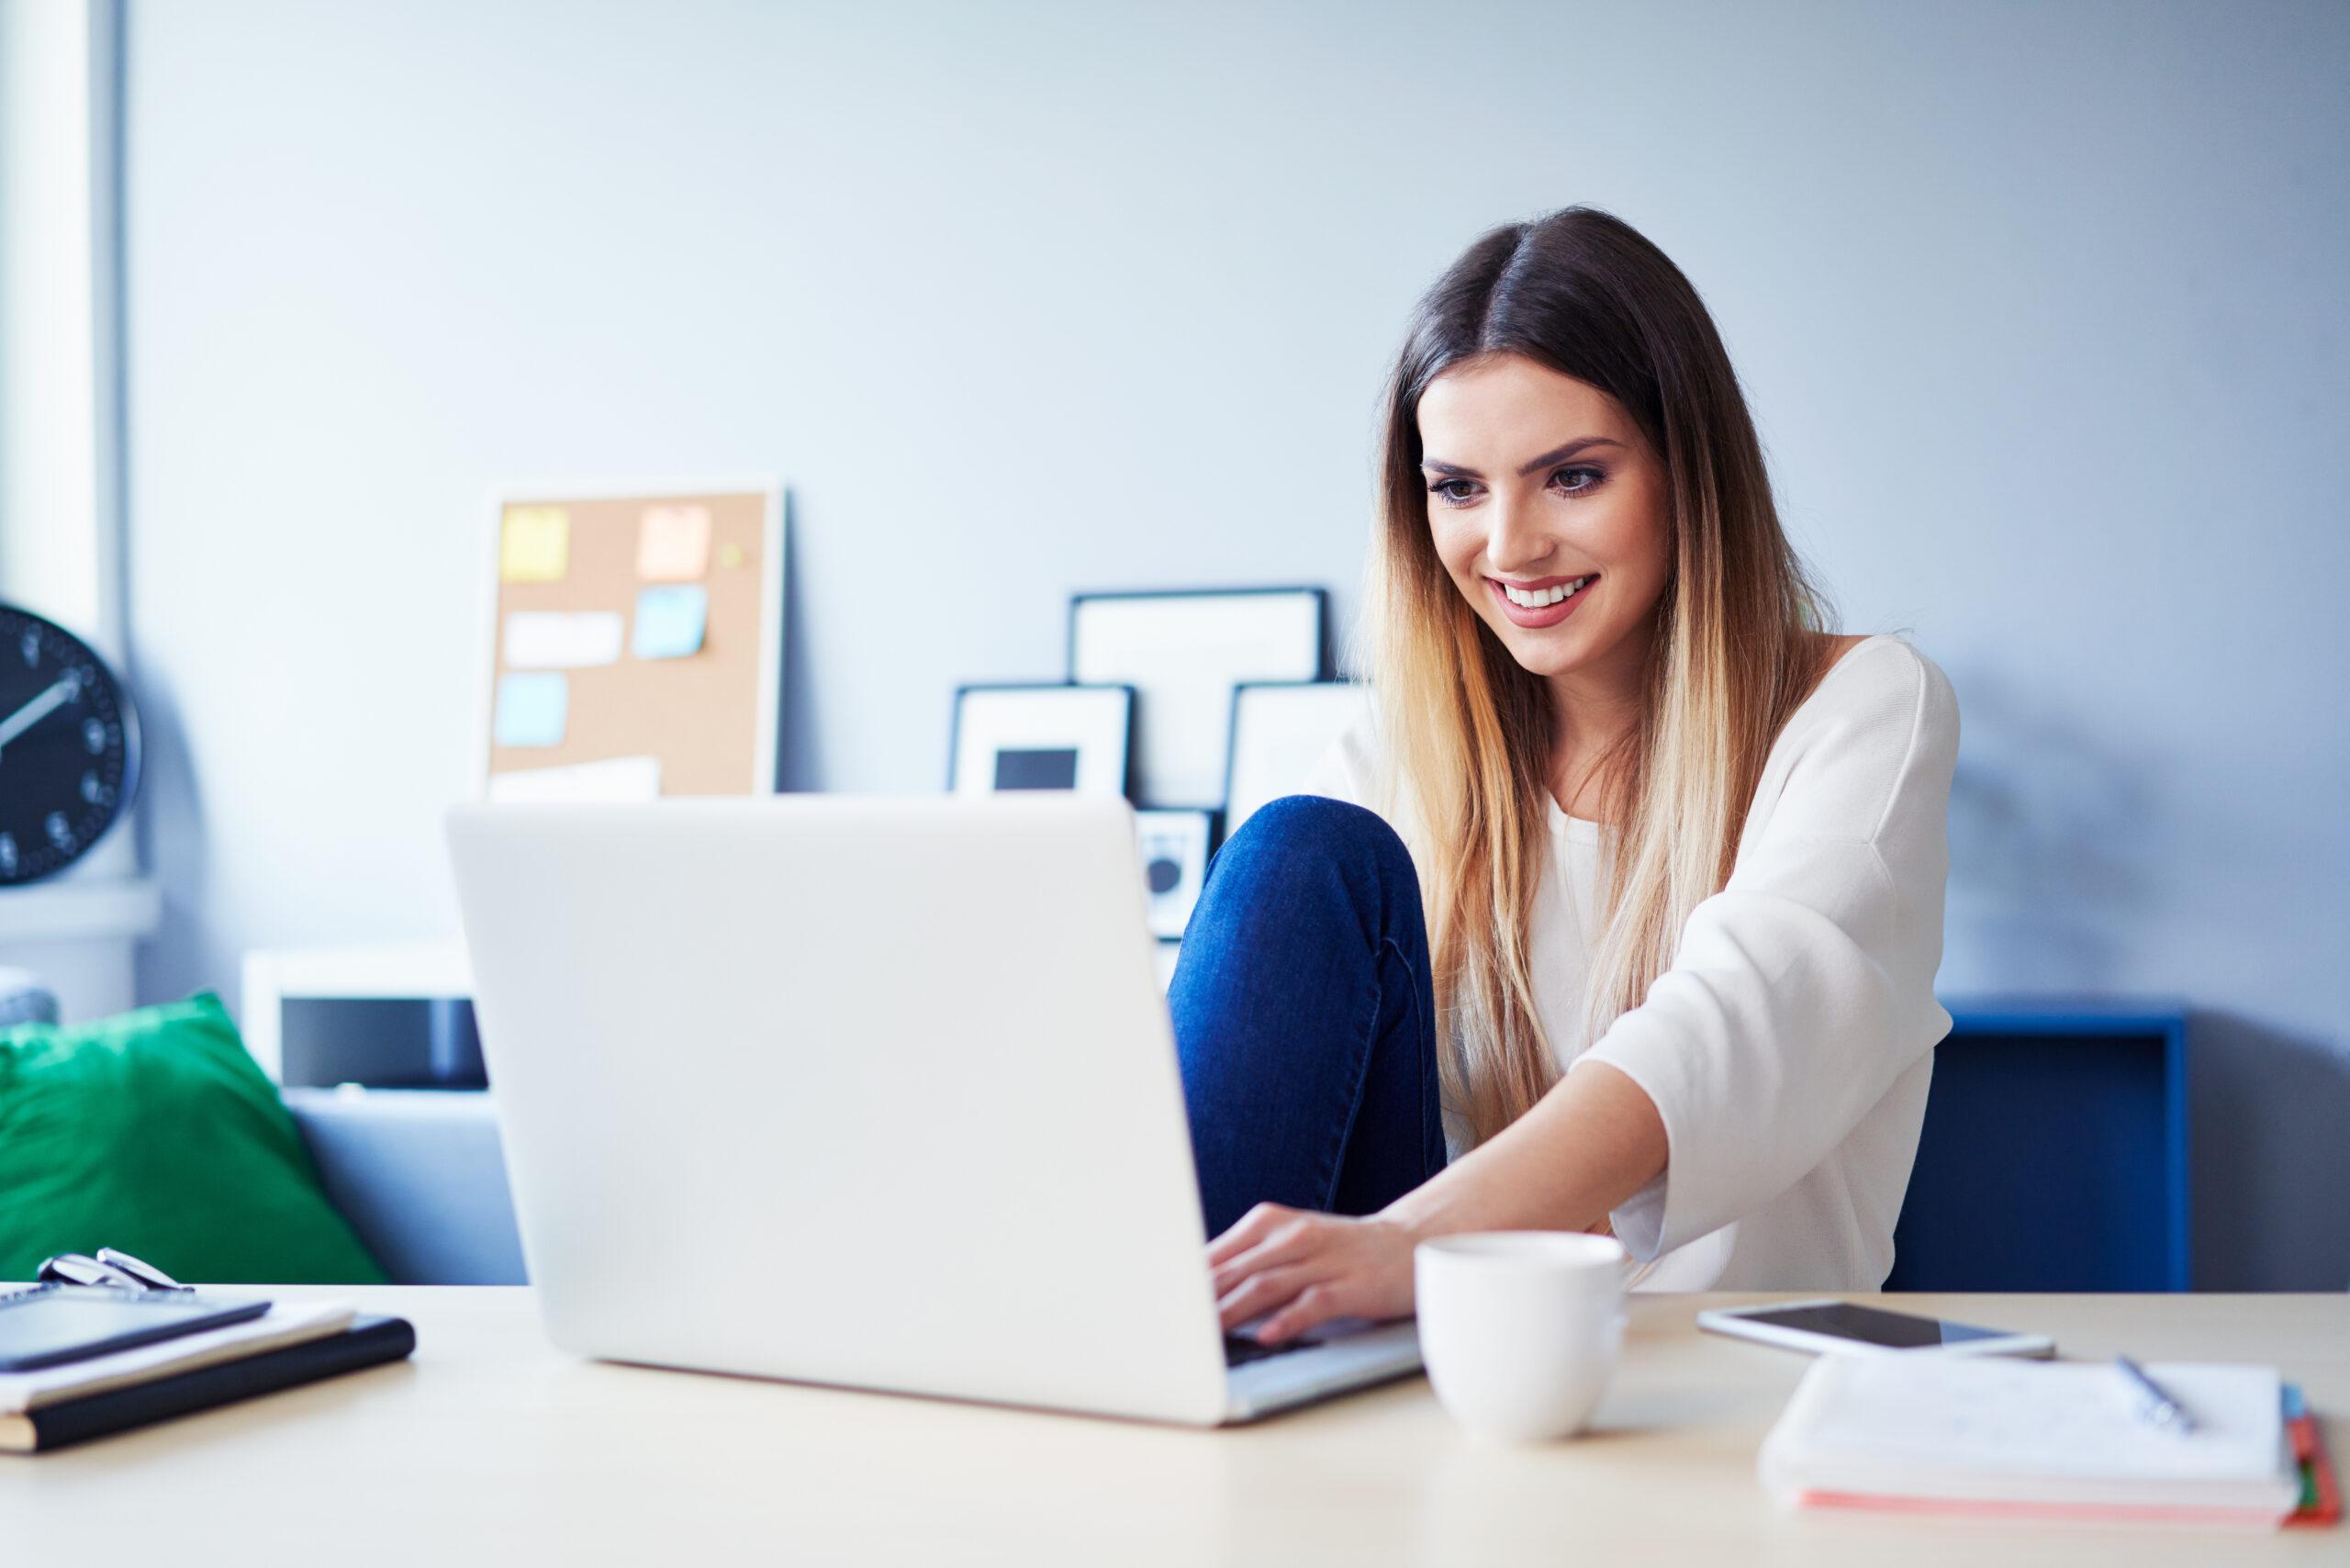 Cheerful young woman using laptop having coffee at desk in home office